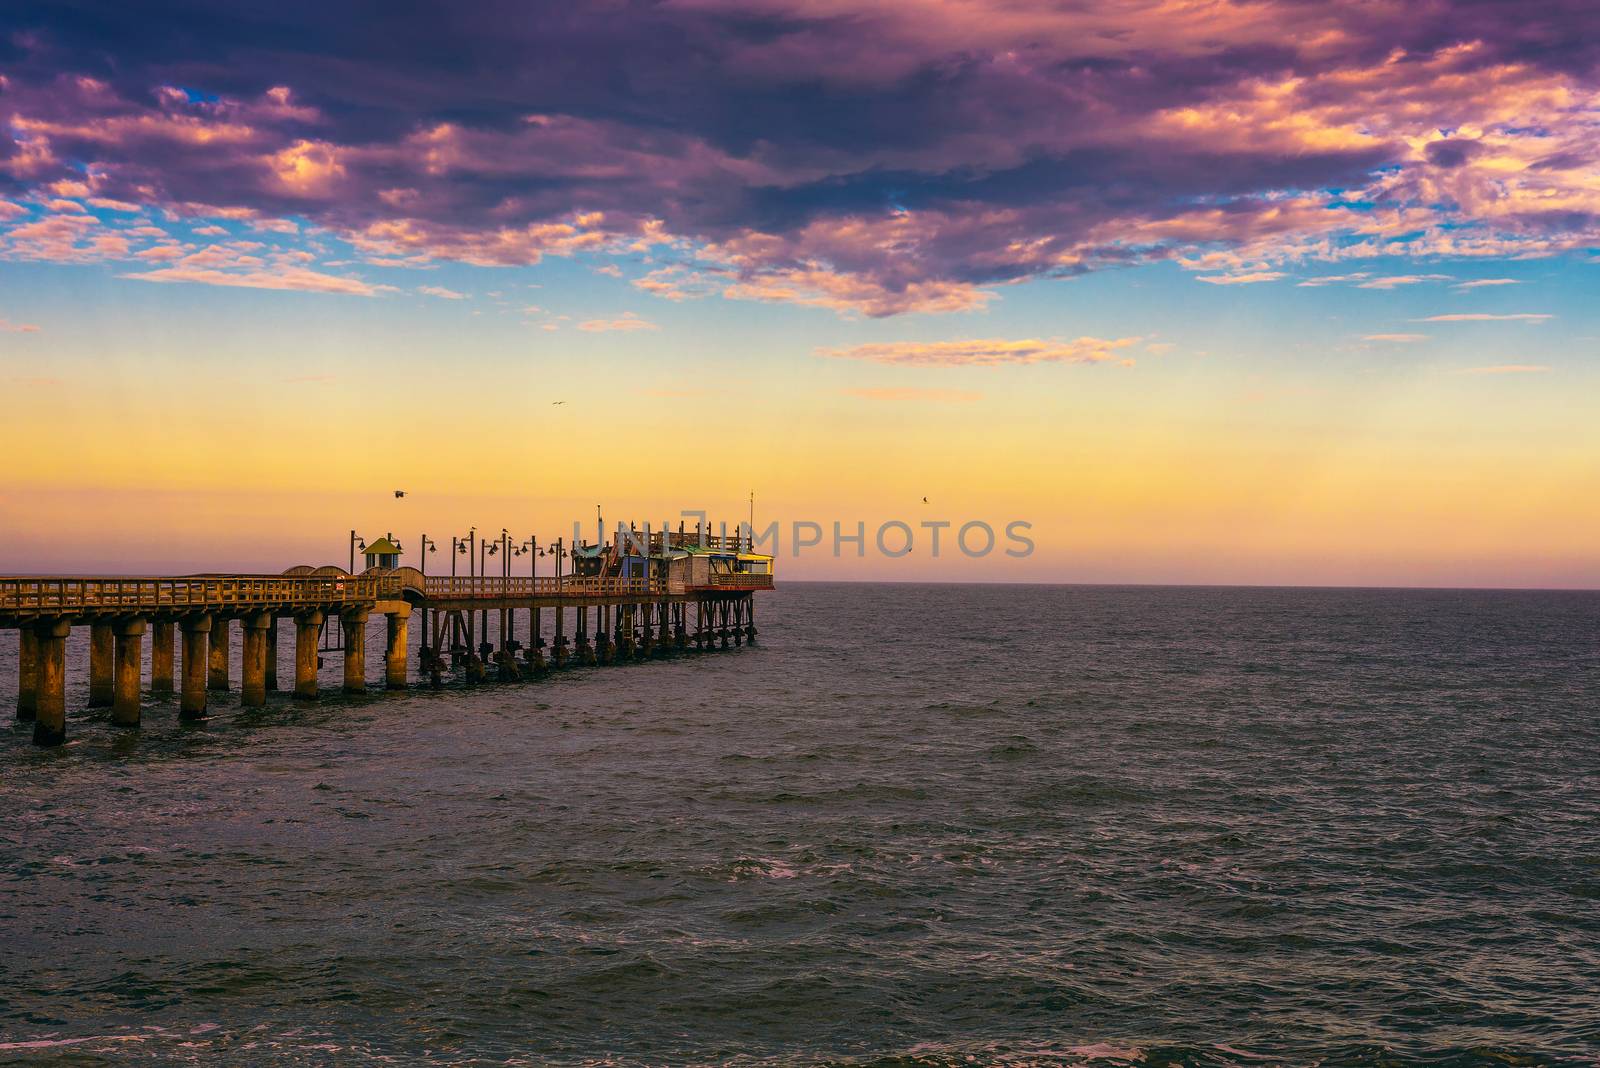 Sunset over the old historic jetty in Swakopmund, Namibia by nickfox